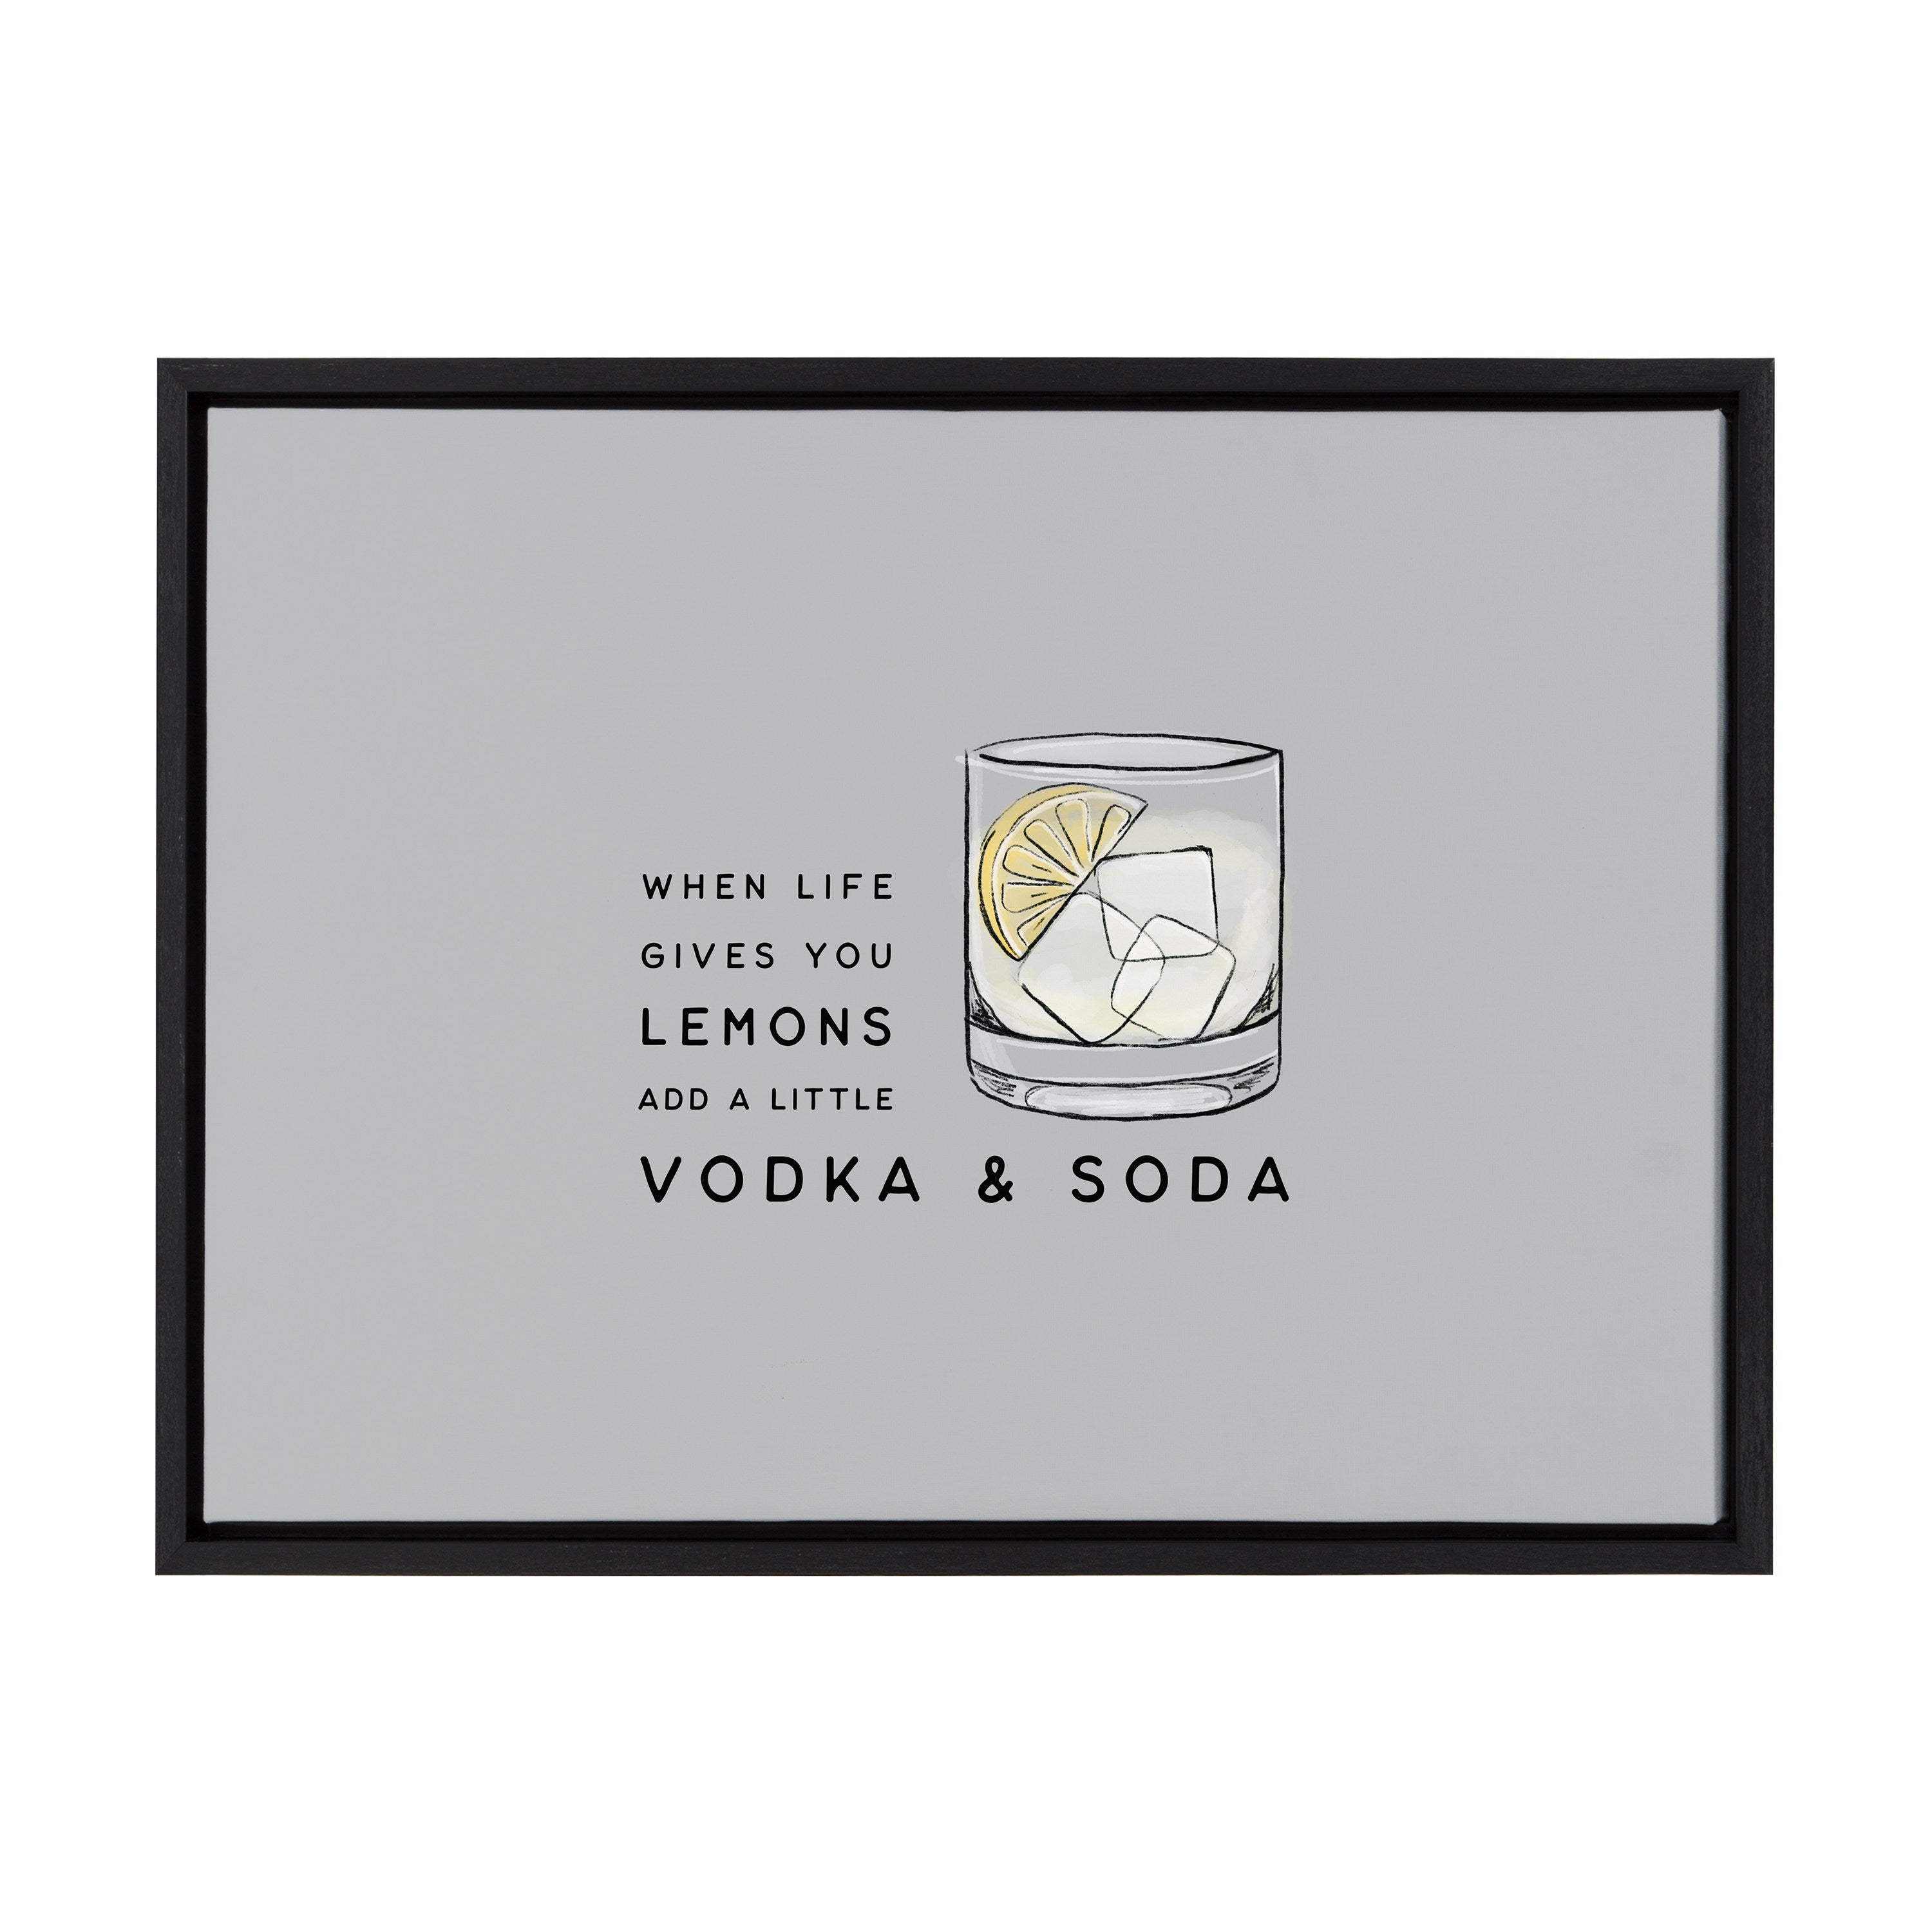 Sylvie When Life Gives You Lemons add Vodka and Soda Framed Canvas by The Creative Bunch Studio